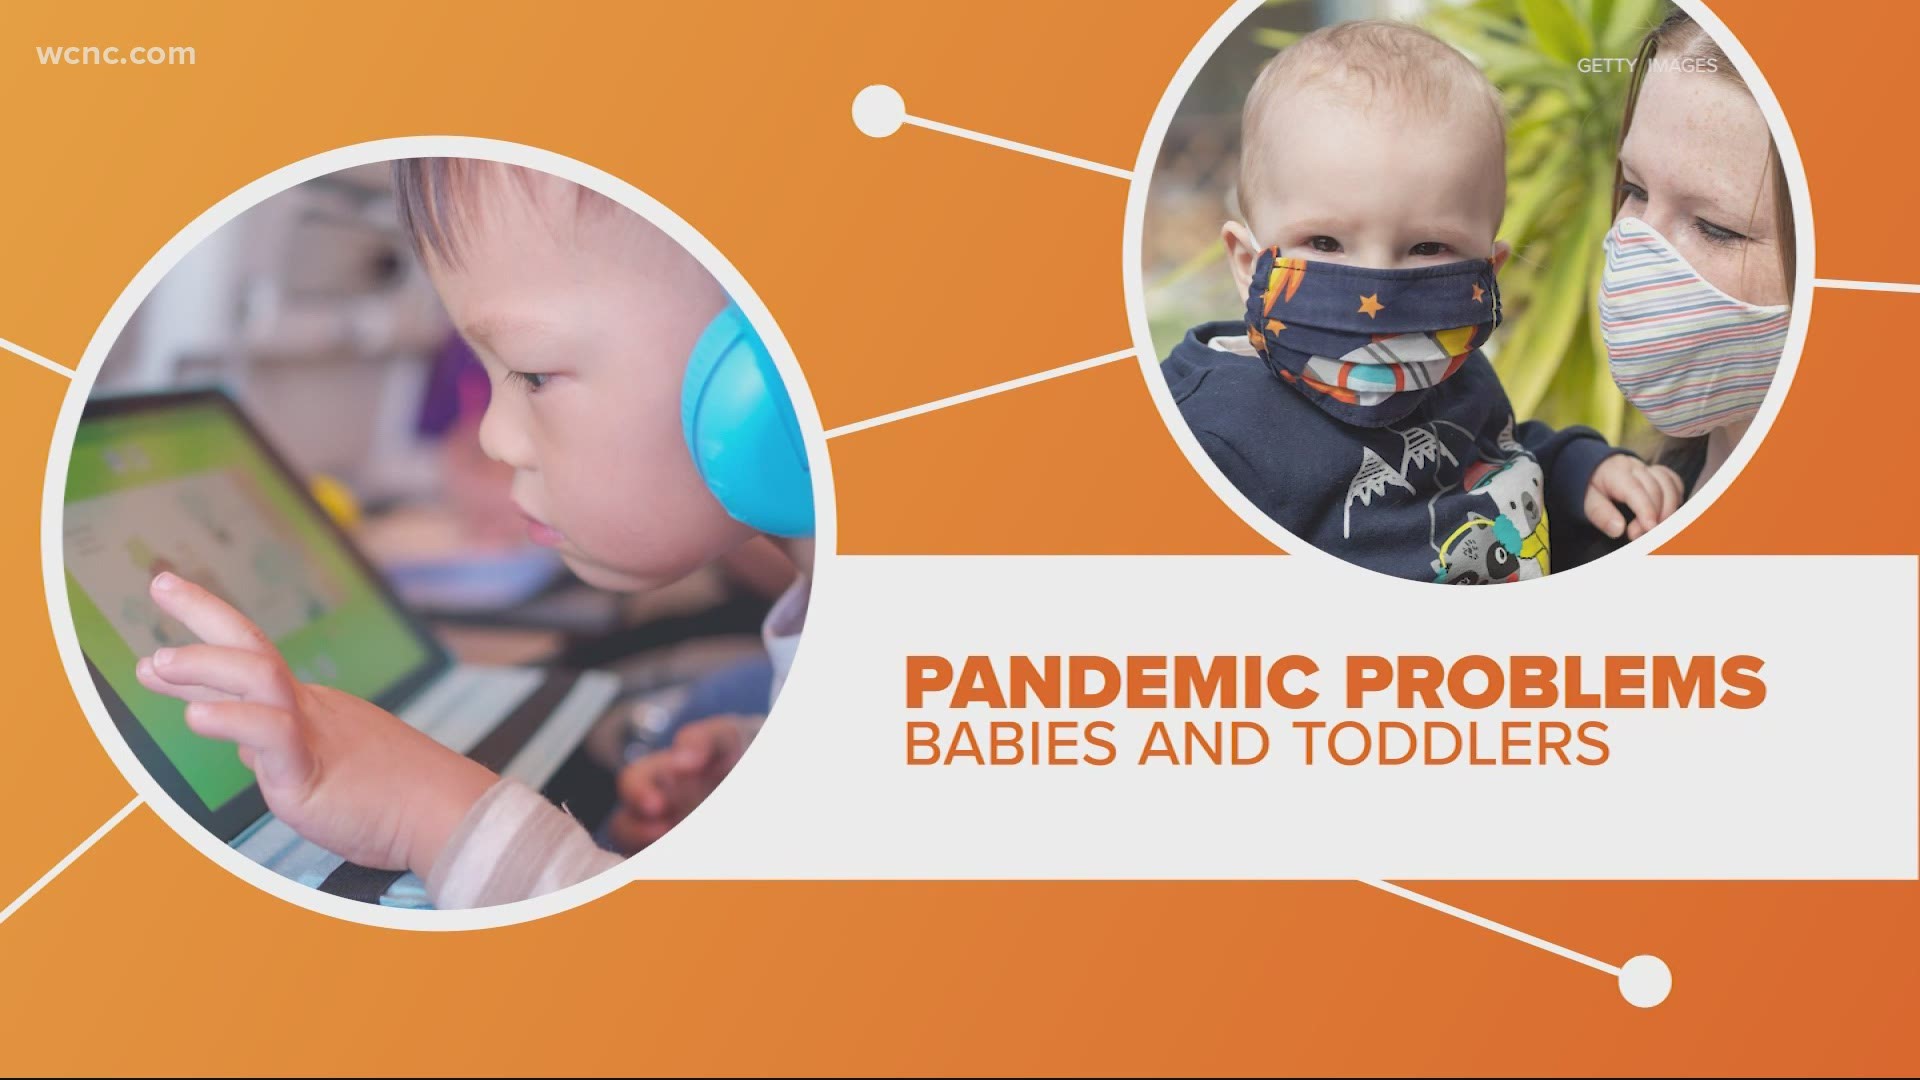 Social distancing is causing us to forget how we used to interact with other human beings. But it's not just adults, the pandemic is having a major impact on kids.